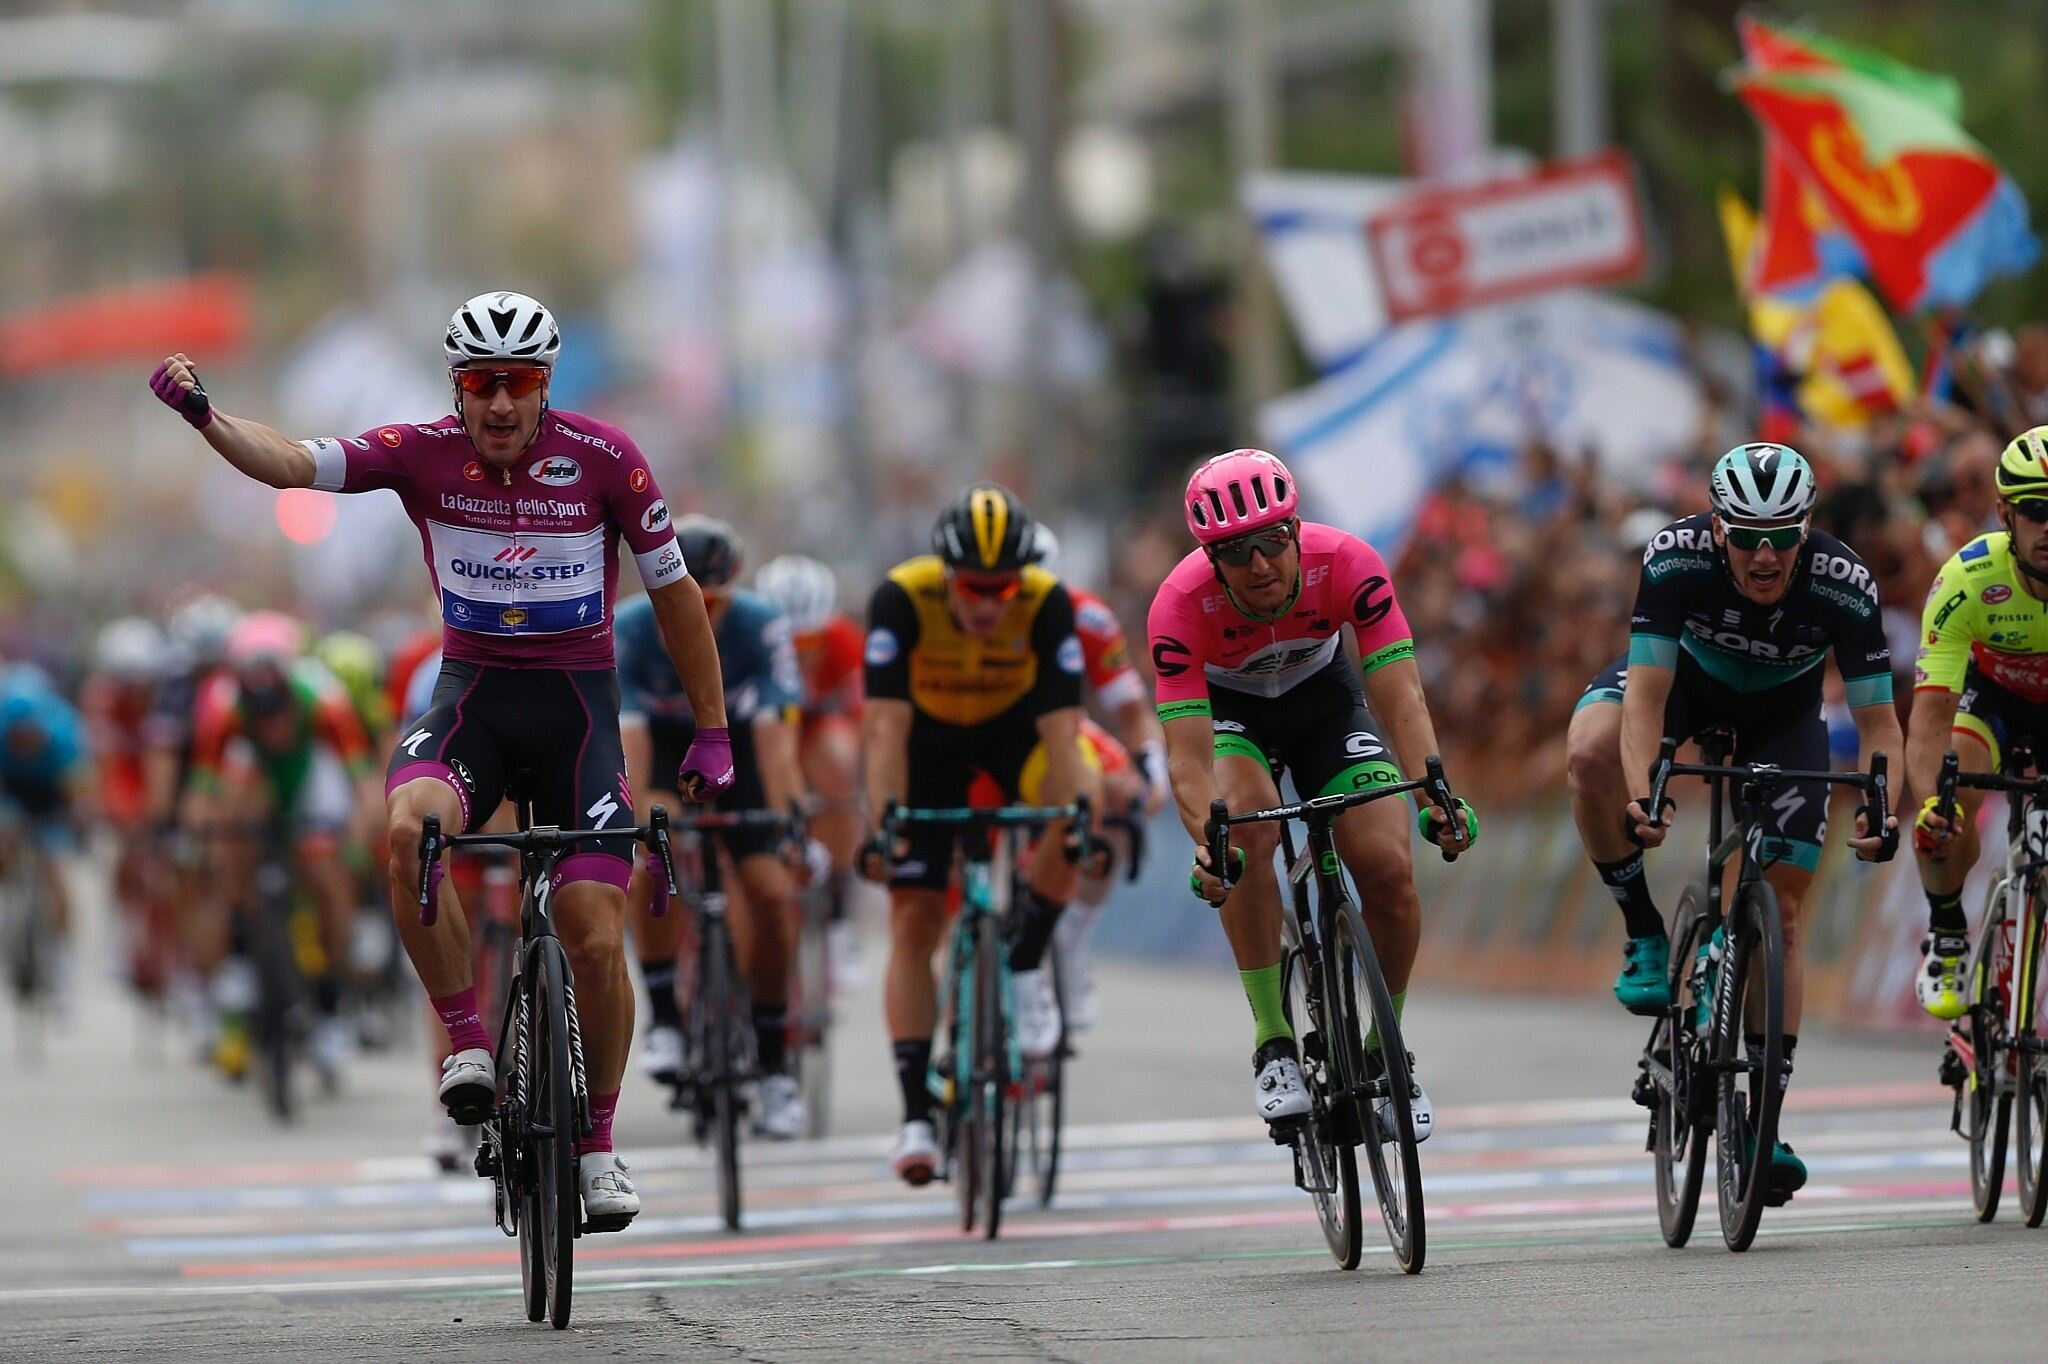 13-facts-about-giro-ditalia-tour-of-italy